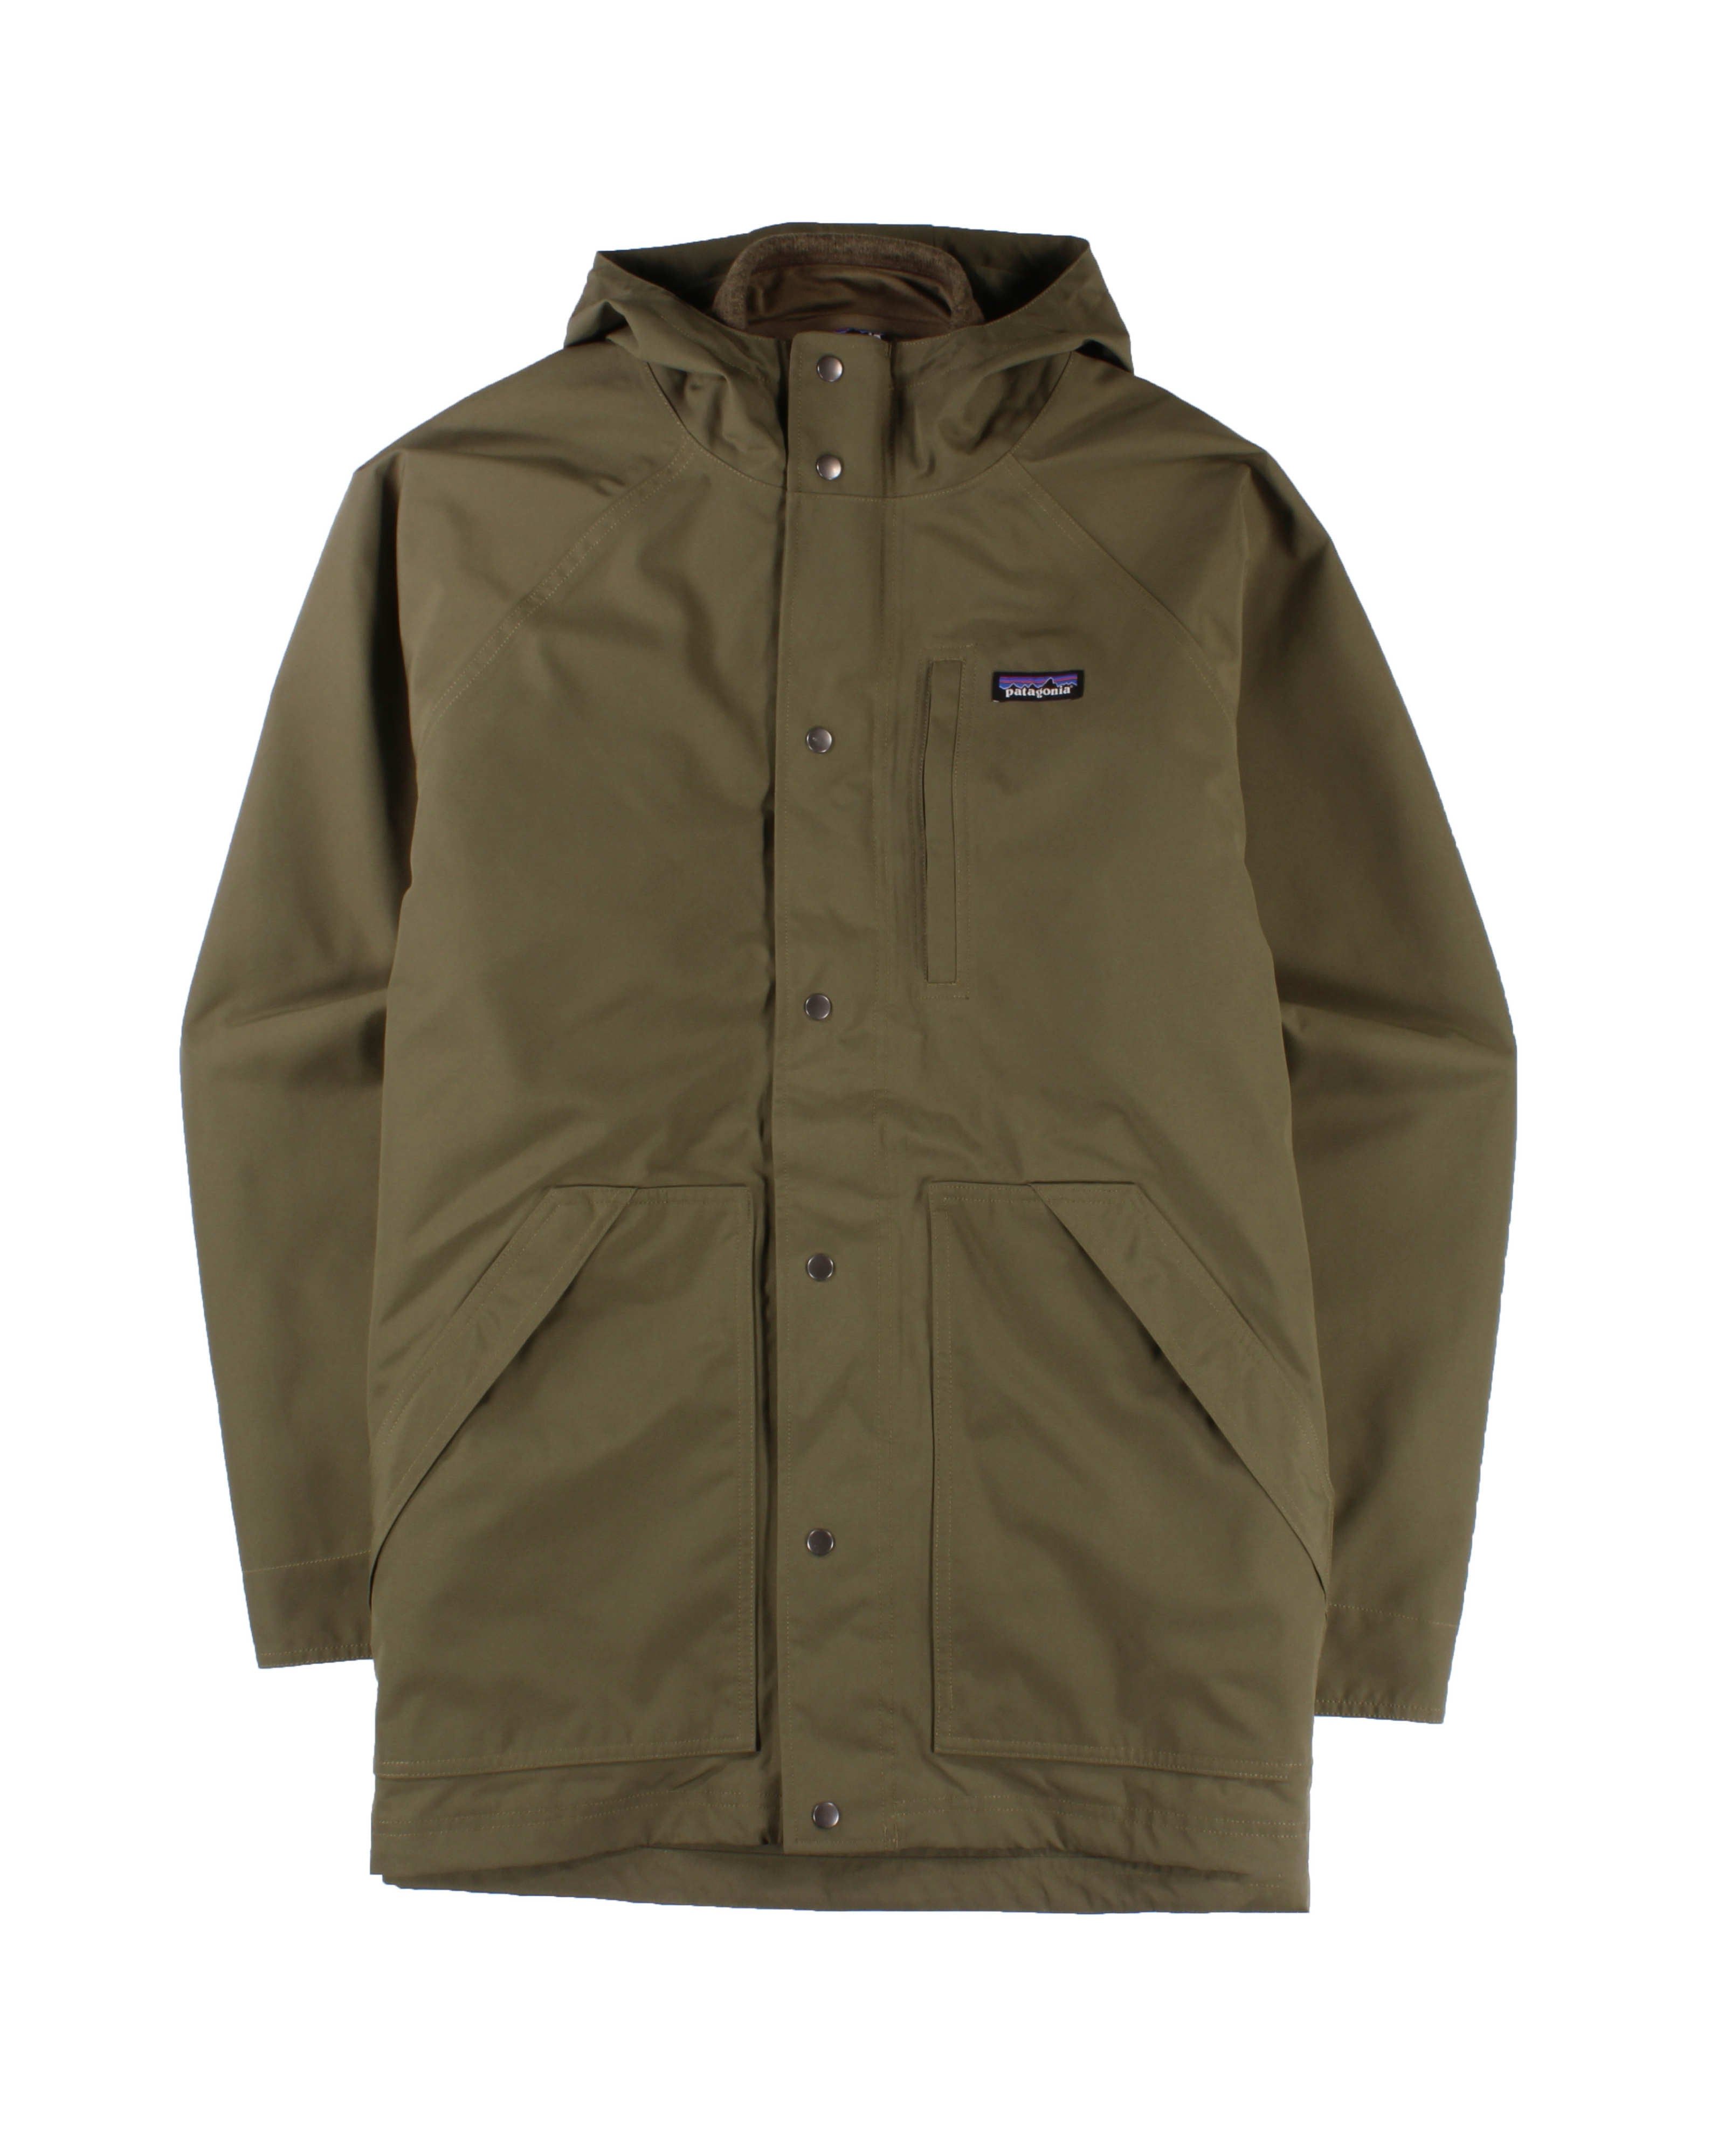 M's Better Sweater® 3-in-1 Parka – Patagonia Worn Wear